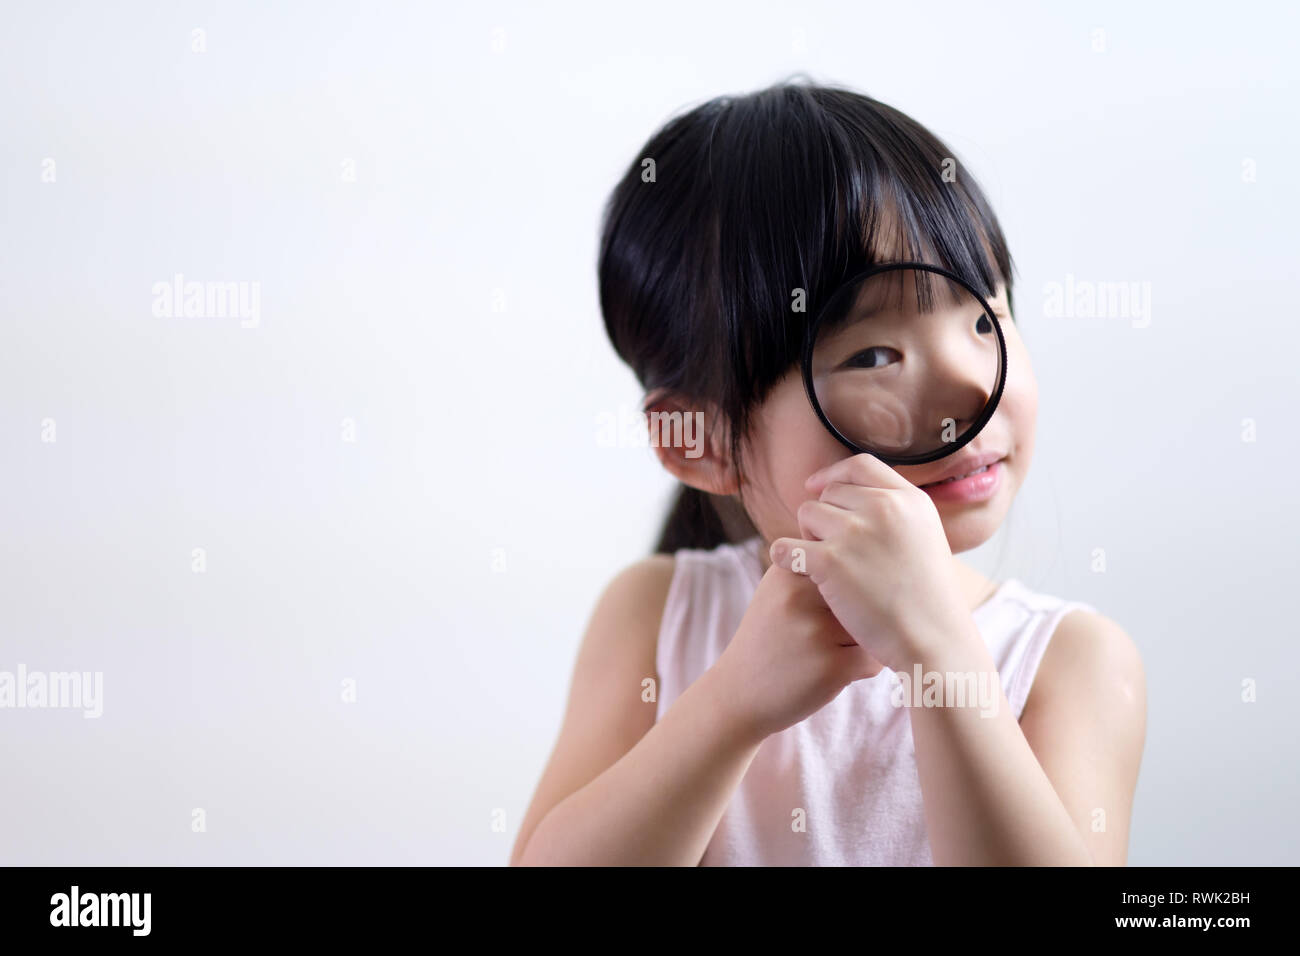 Little girl child looking through a magnifying glass on white background Stock Photo